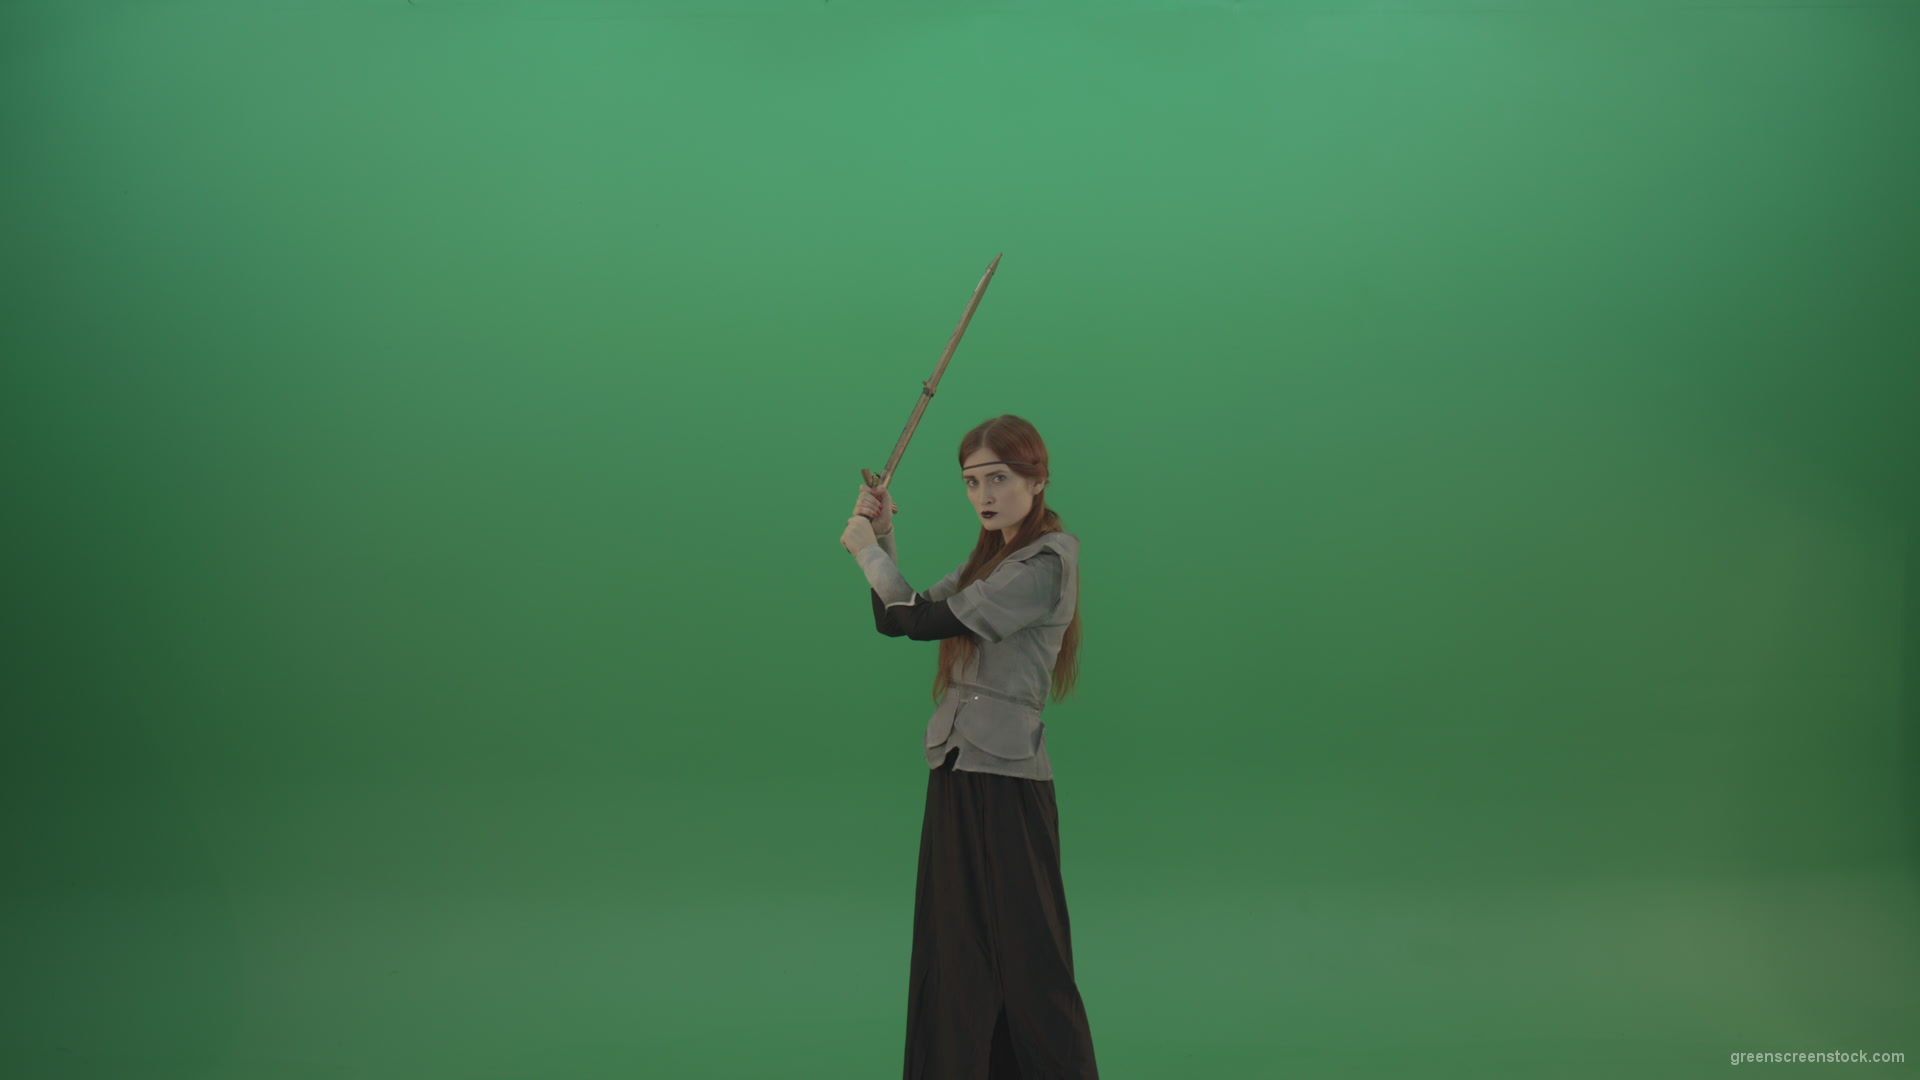 Swinging-on-a-green-background-with-a-sword-the-girl-gracefully-shows-her-strength_001 Green Screen Stock